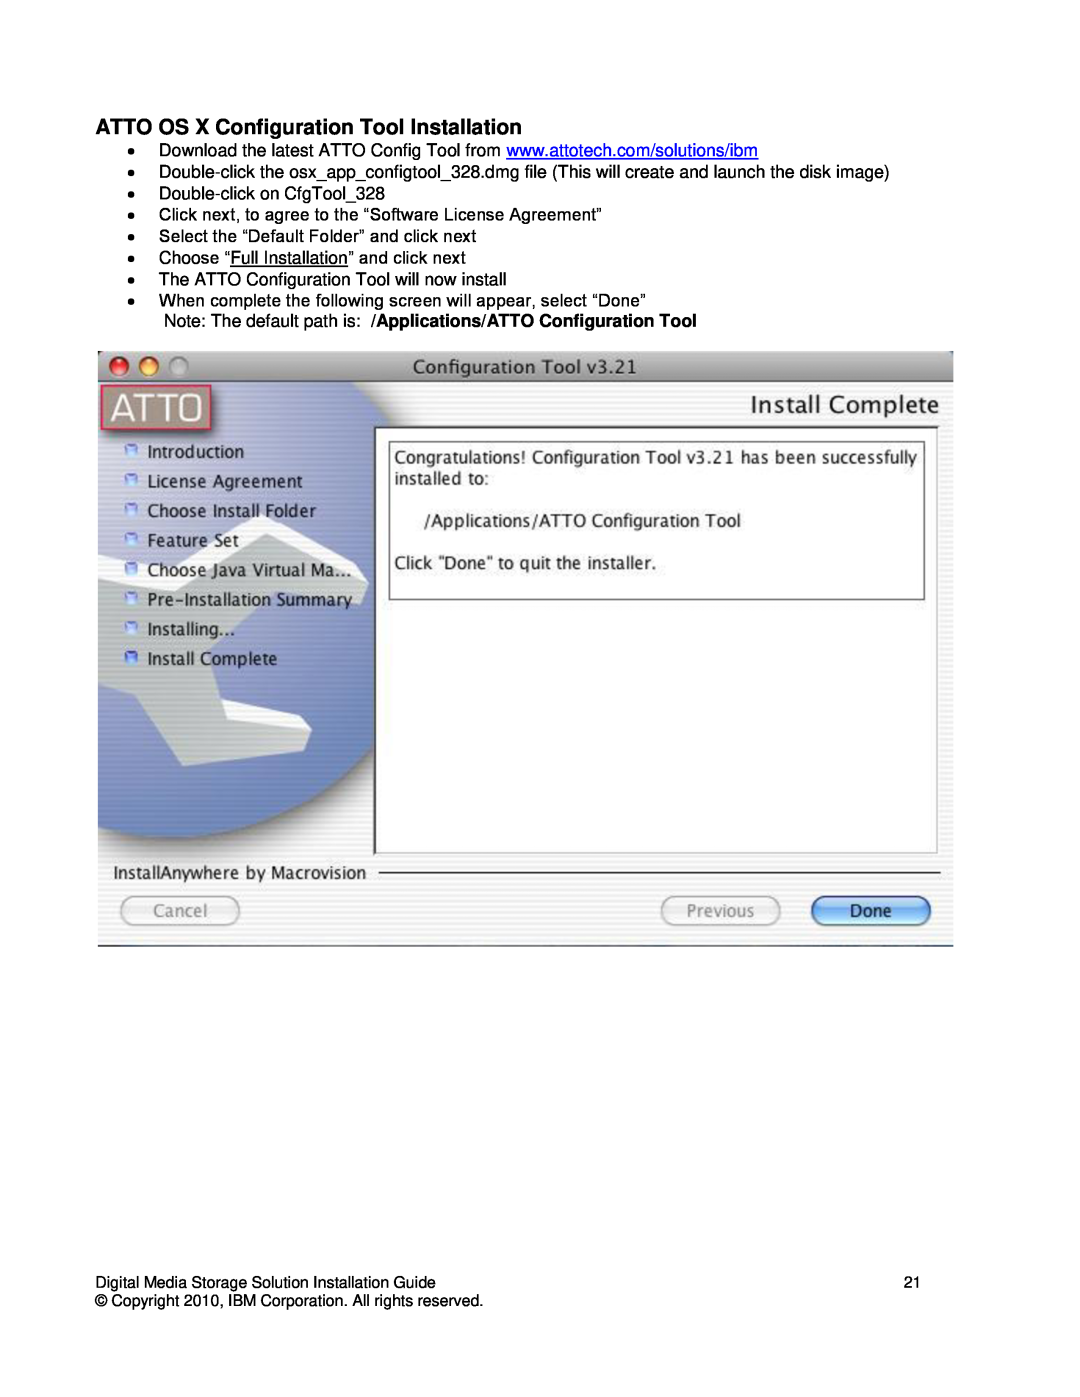 IBM DS3000 manual ATTO OS X Configuration Tool Installation, Note The default path is /Applications/ATTO Configuration Tool 